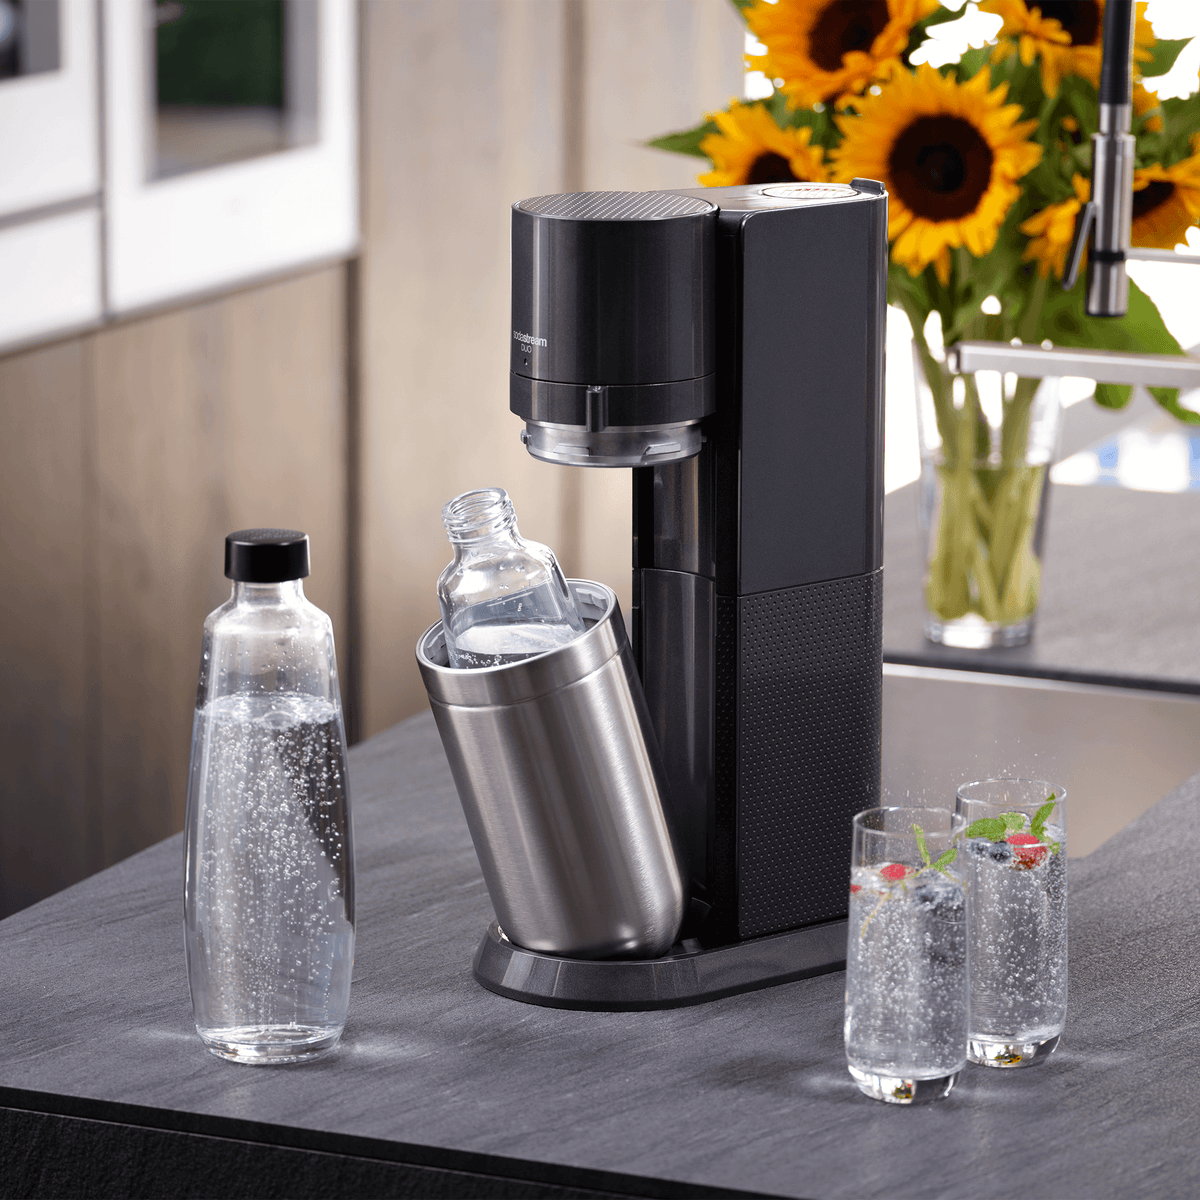 SodaStream DUO Quick Connect Sparkling Water Maker 